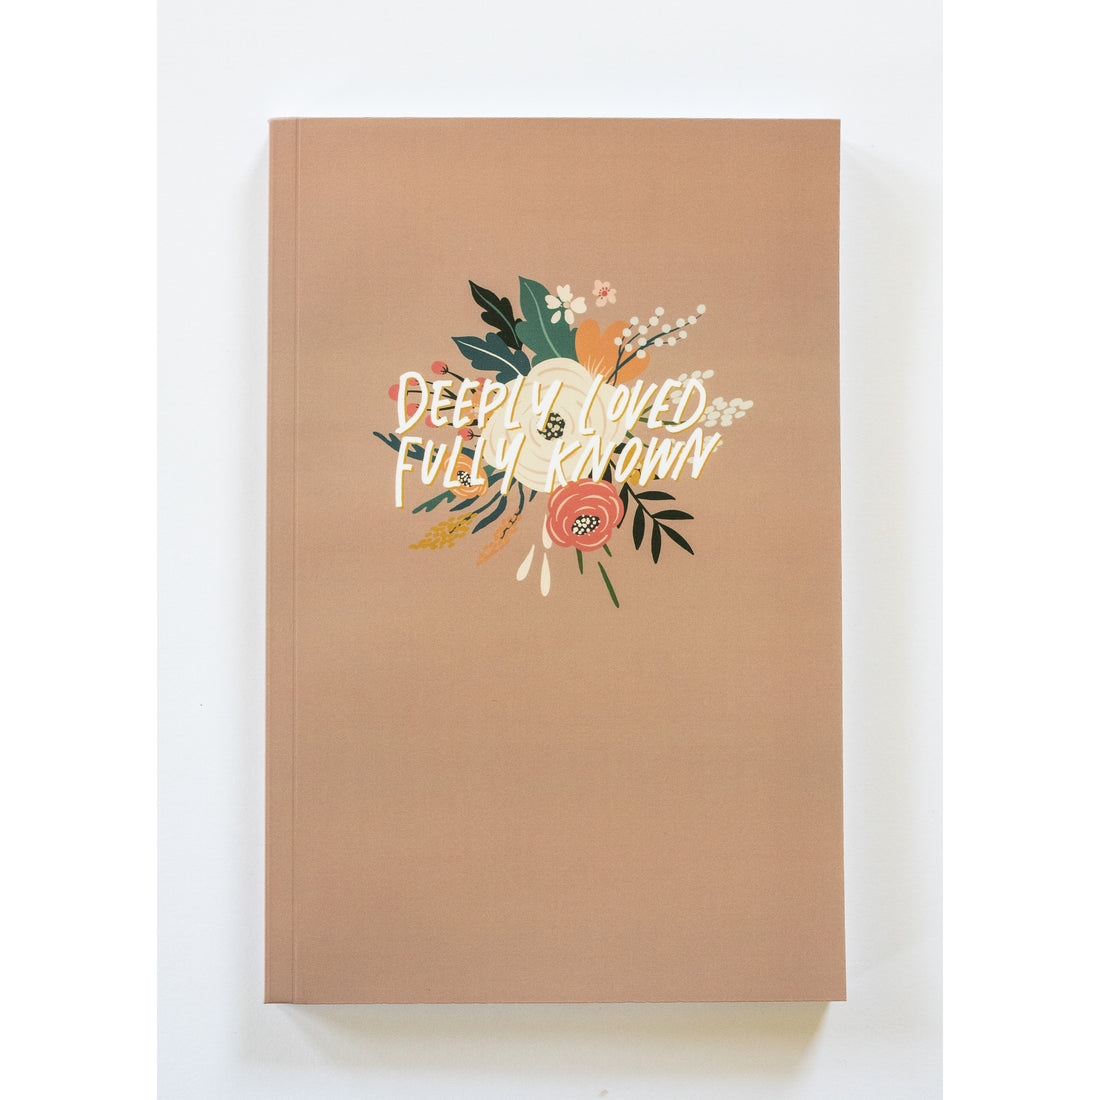 Deeply Loved Fully Known Journal